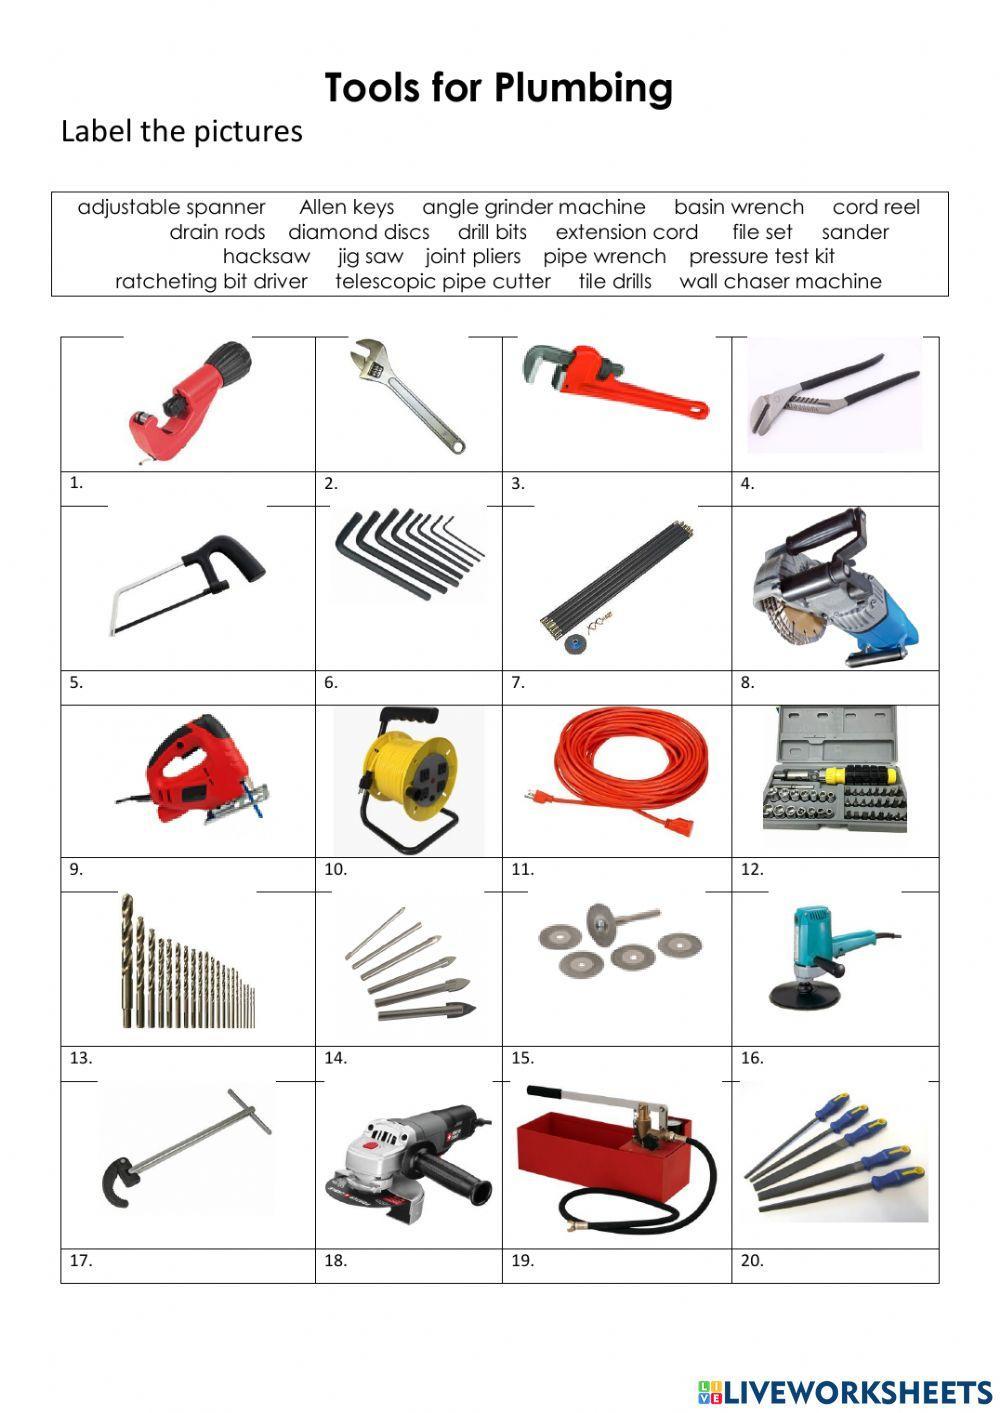 Tools for Plumbing